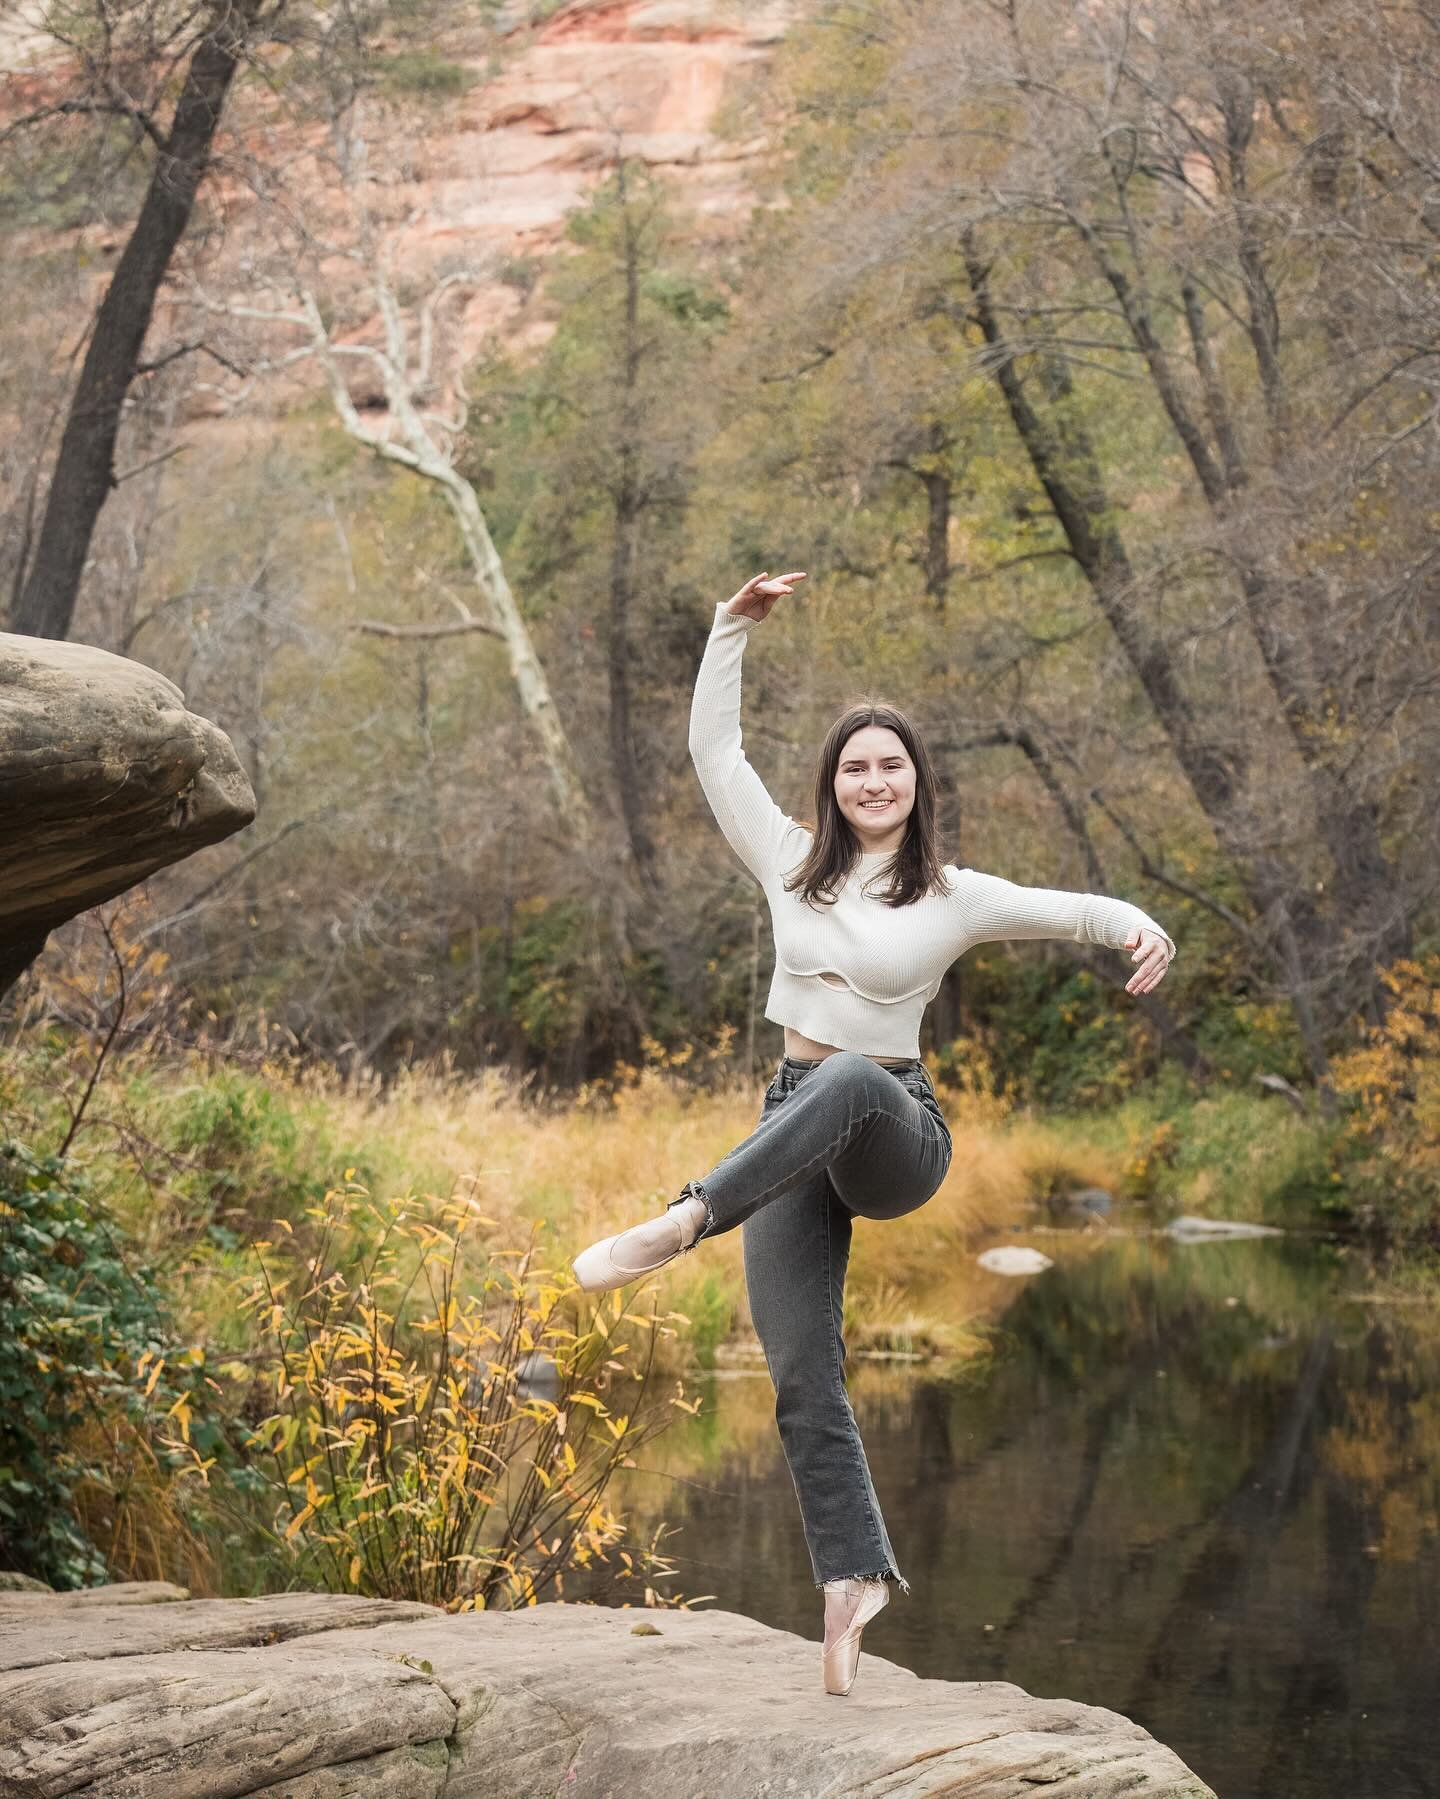 A Ballerina in Oak Creek! And some family photos. What a great family! What a cool high school senior 🤩.